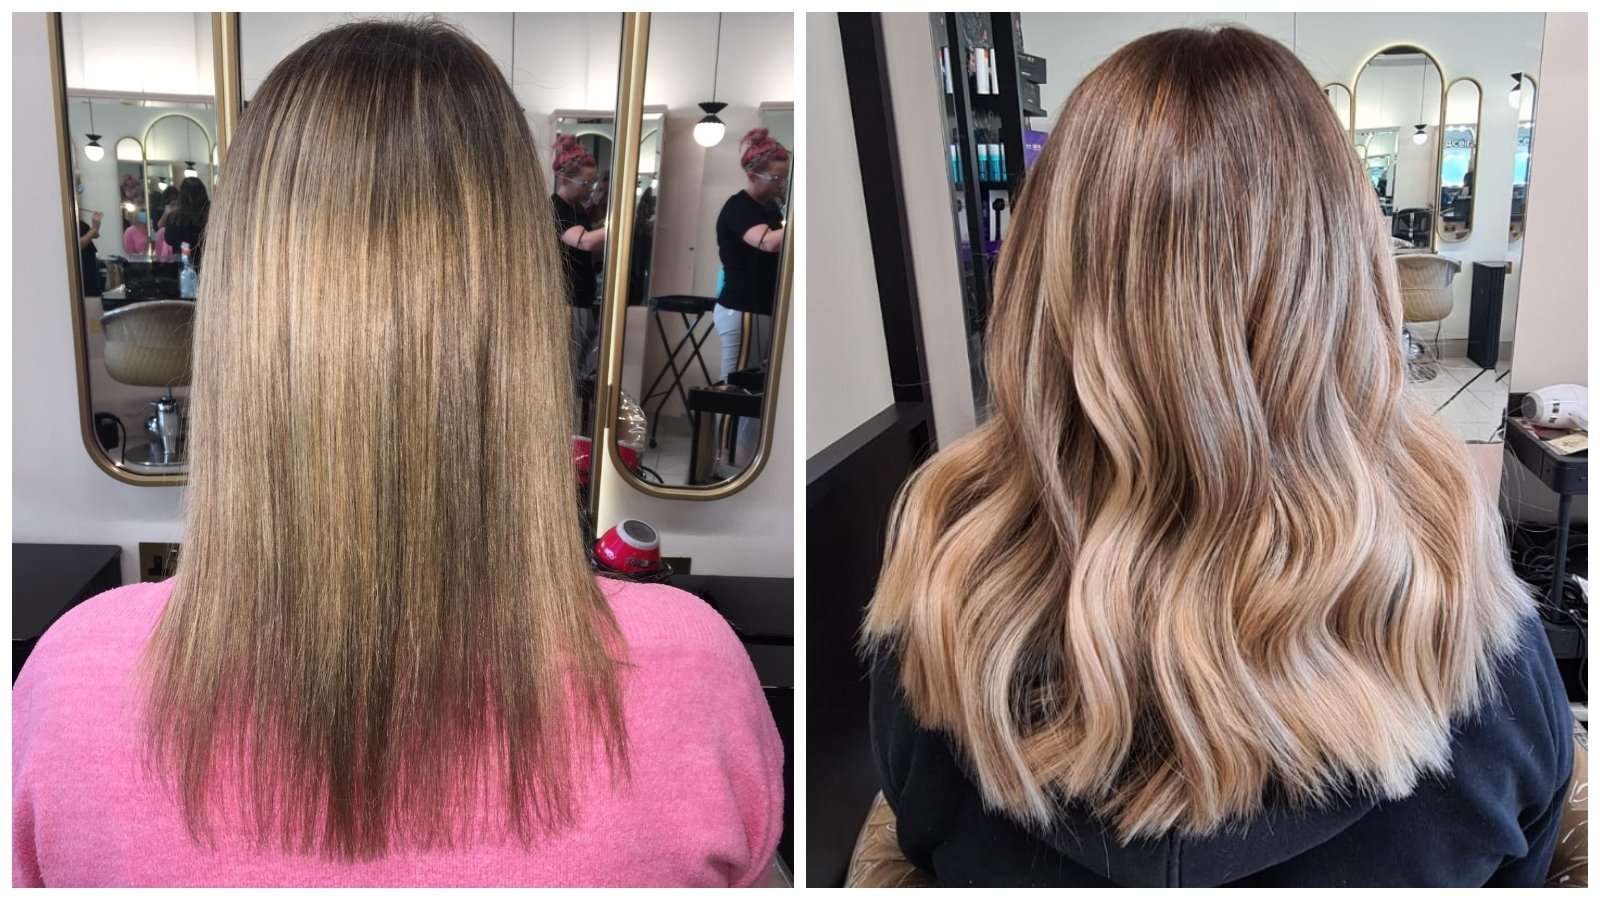 Review: Emma Power tries tape hair extensions